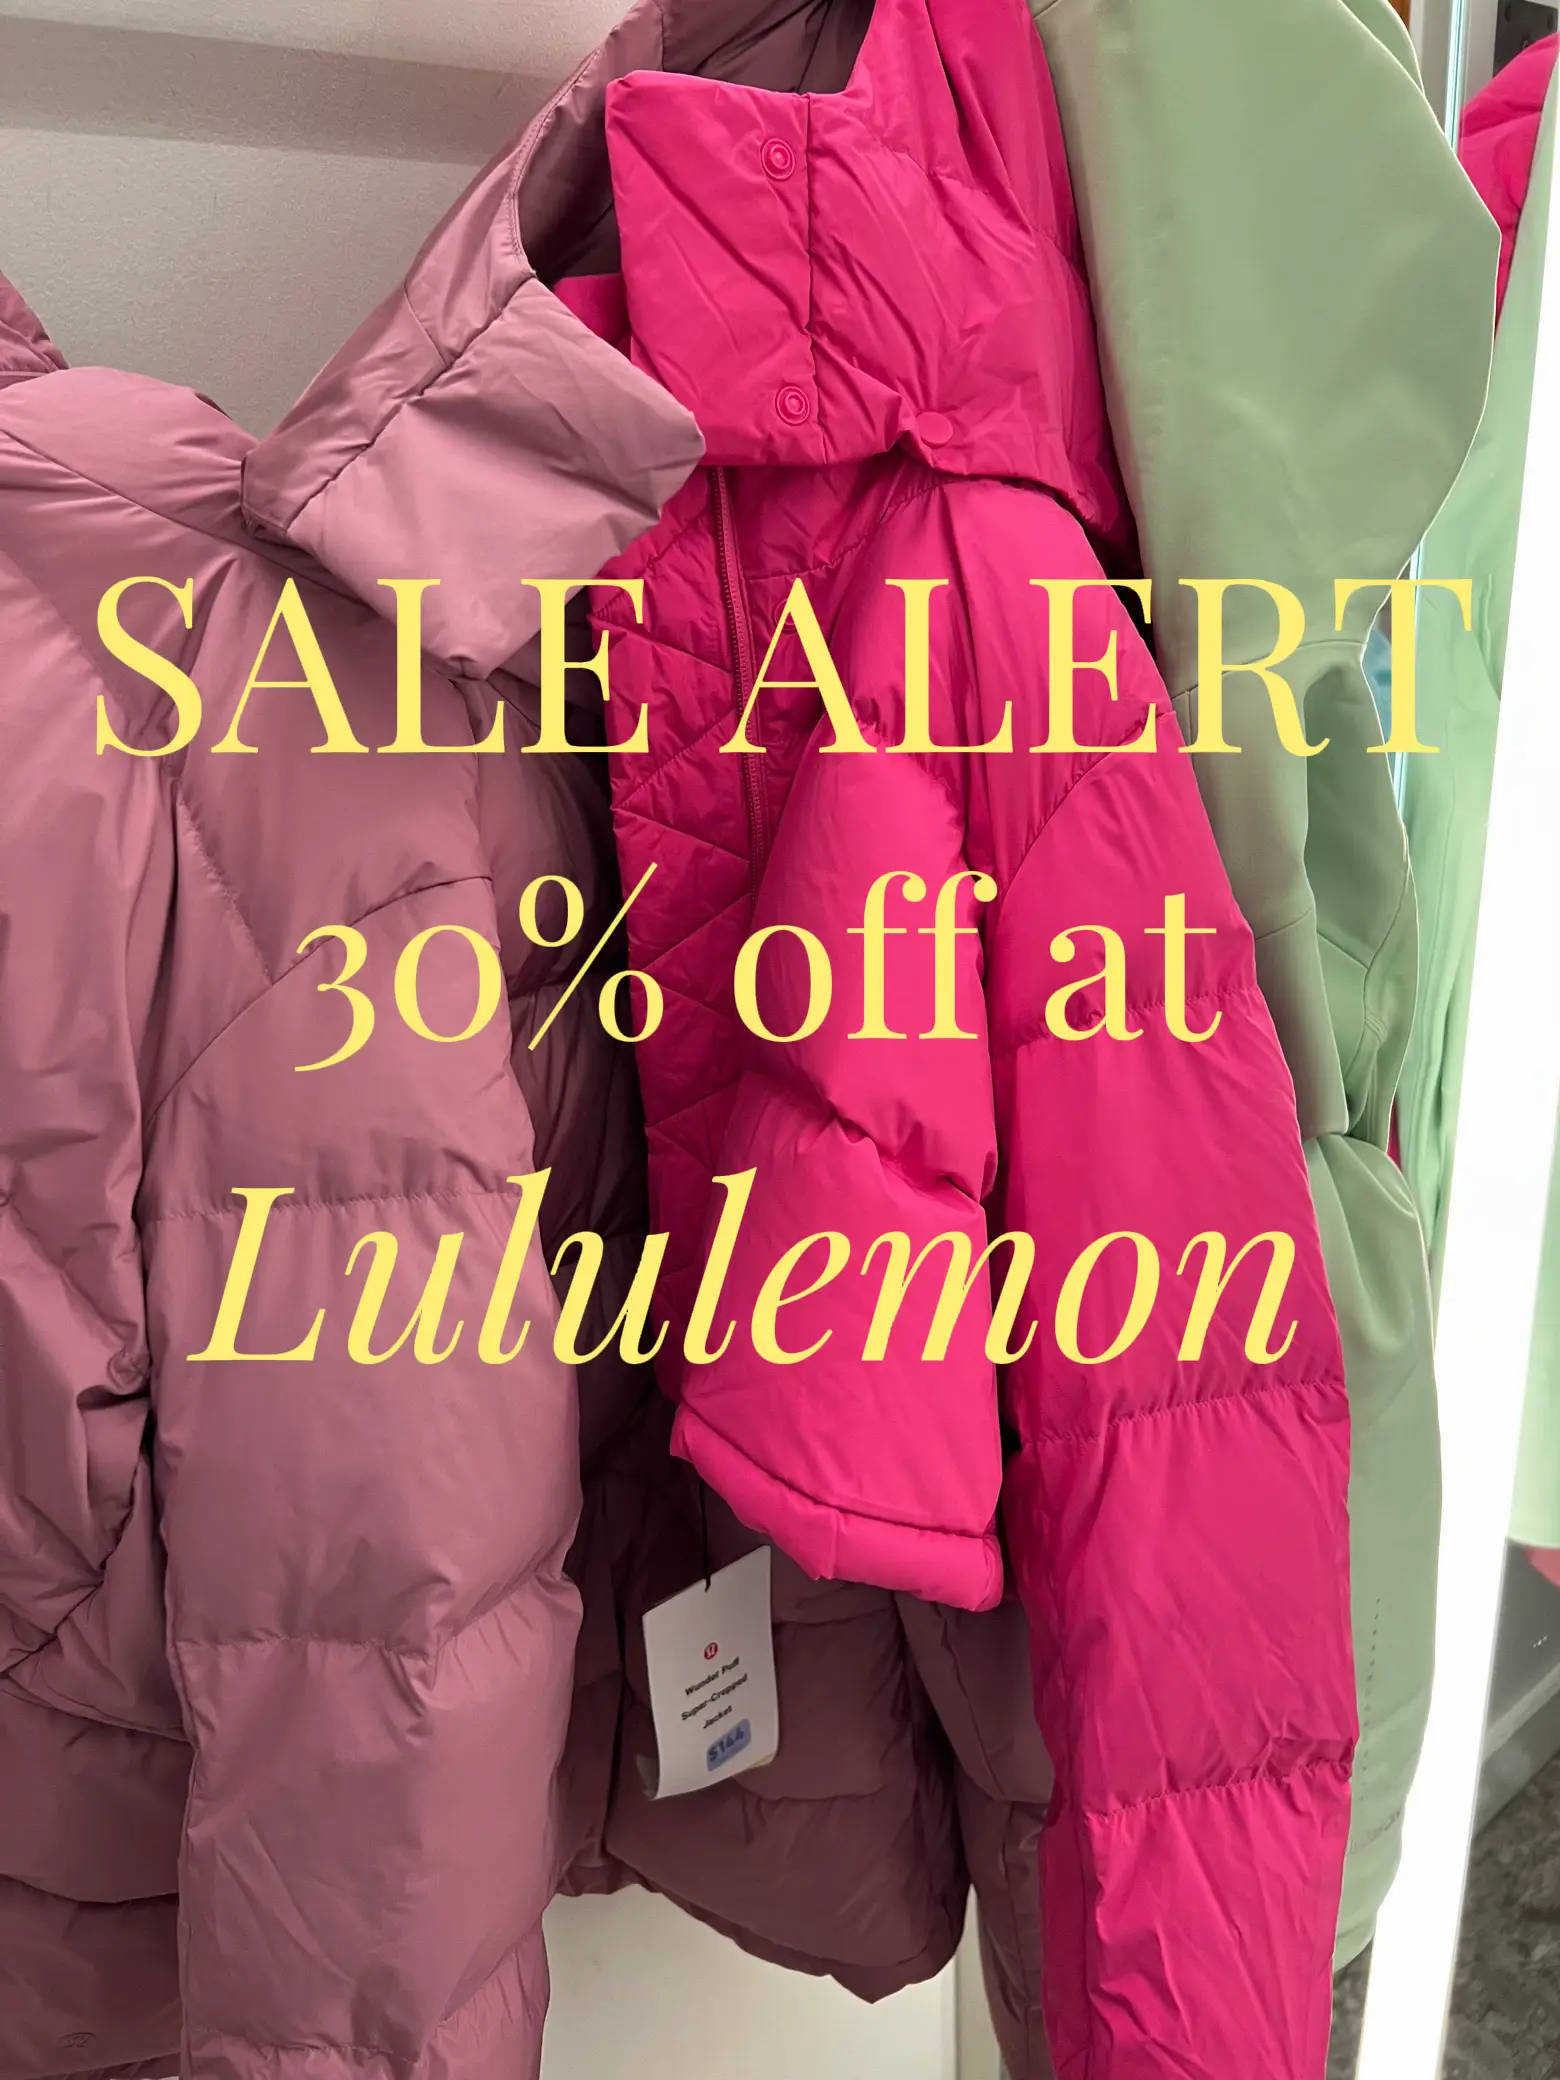 The best @lululemon sale of the year is happening now ✨ This